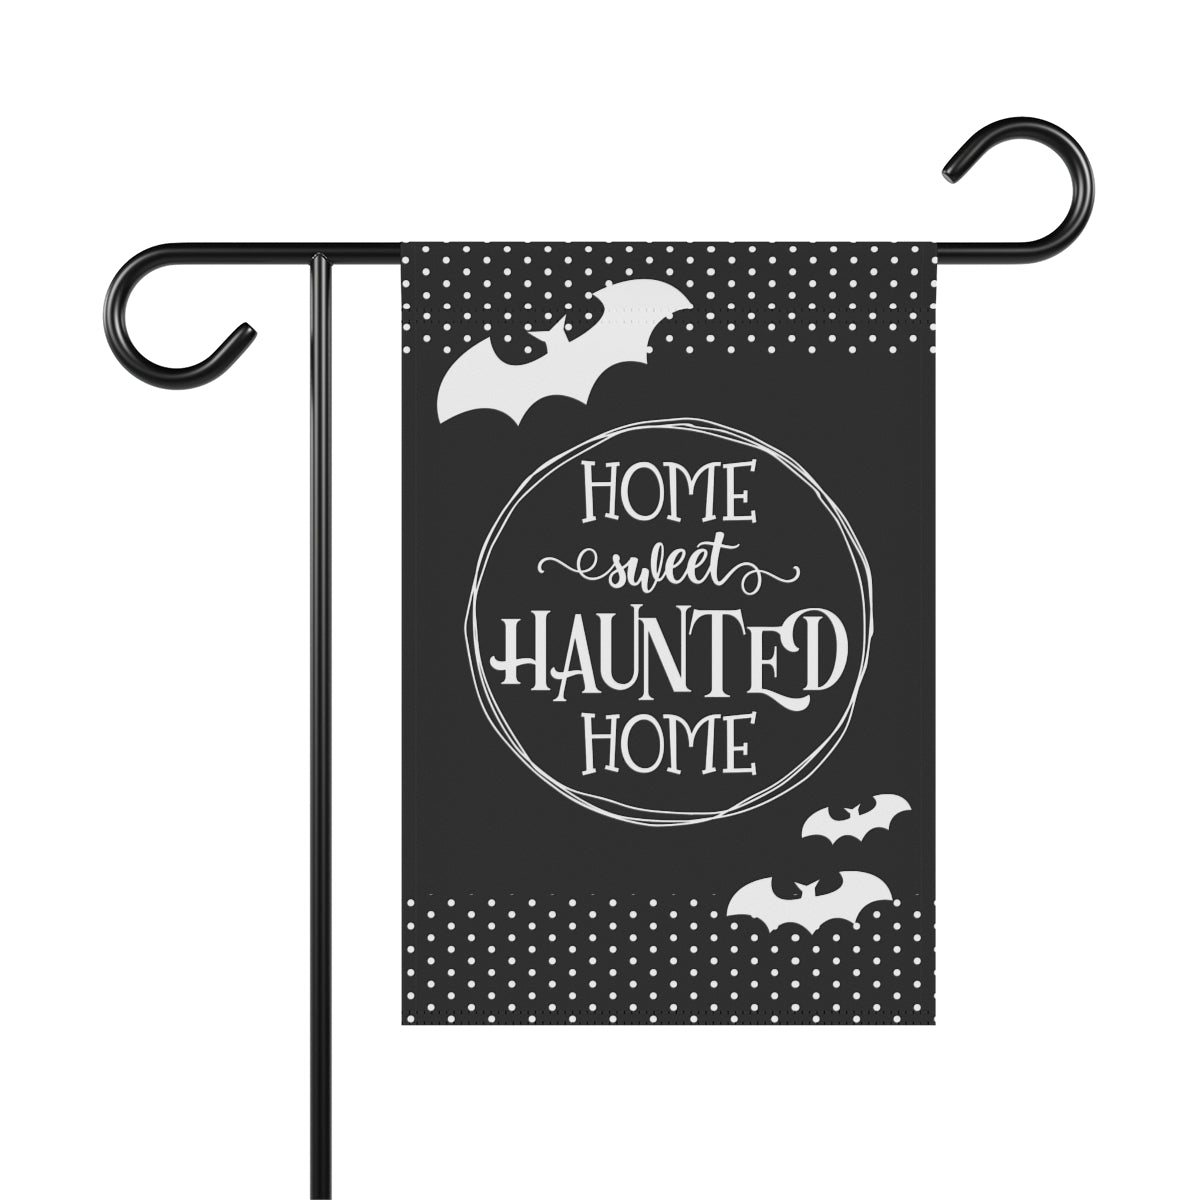 Home Sweet Haunted Home Garden Flag in Black and White with Flying Bats